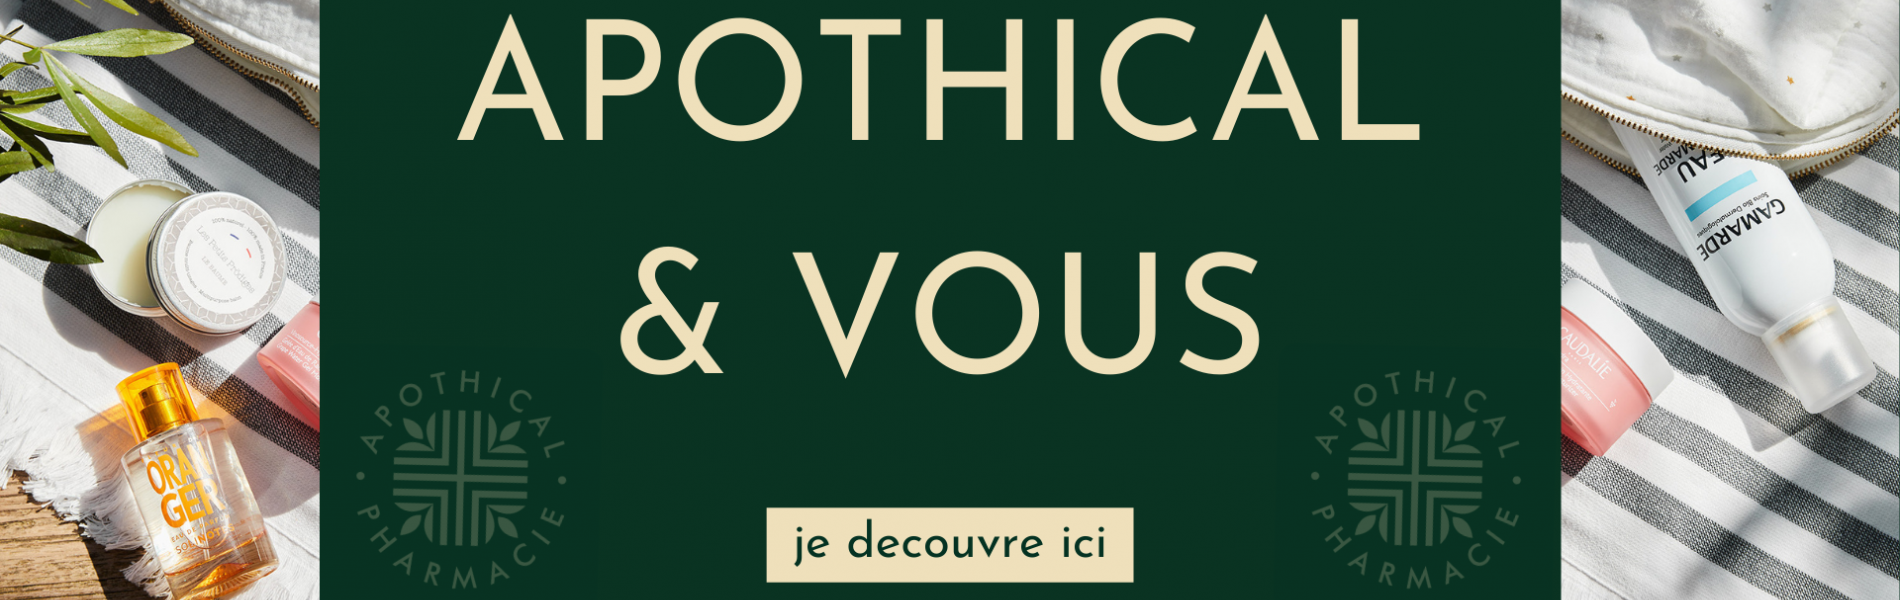 Apothical & vous